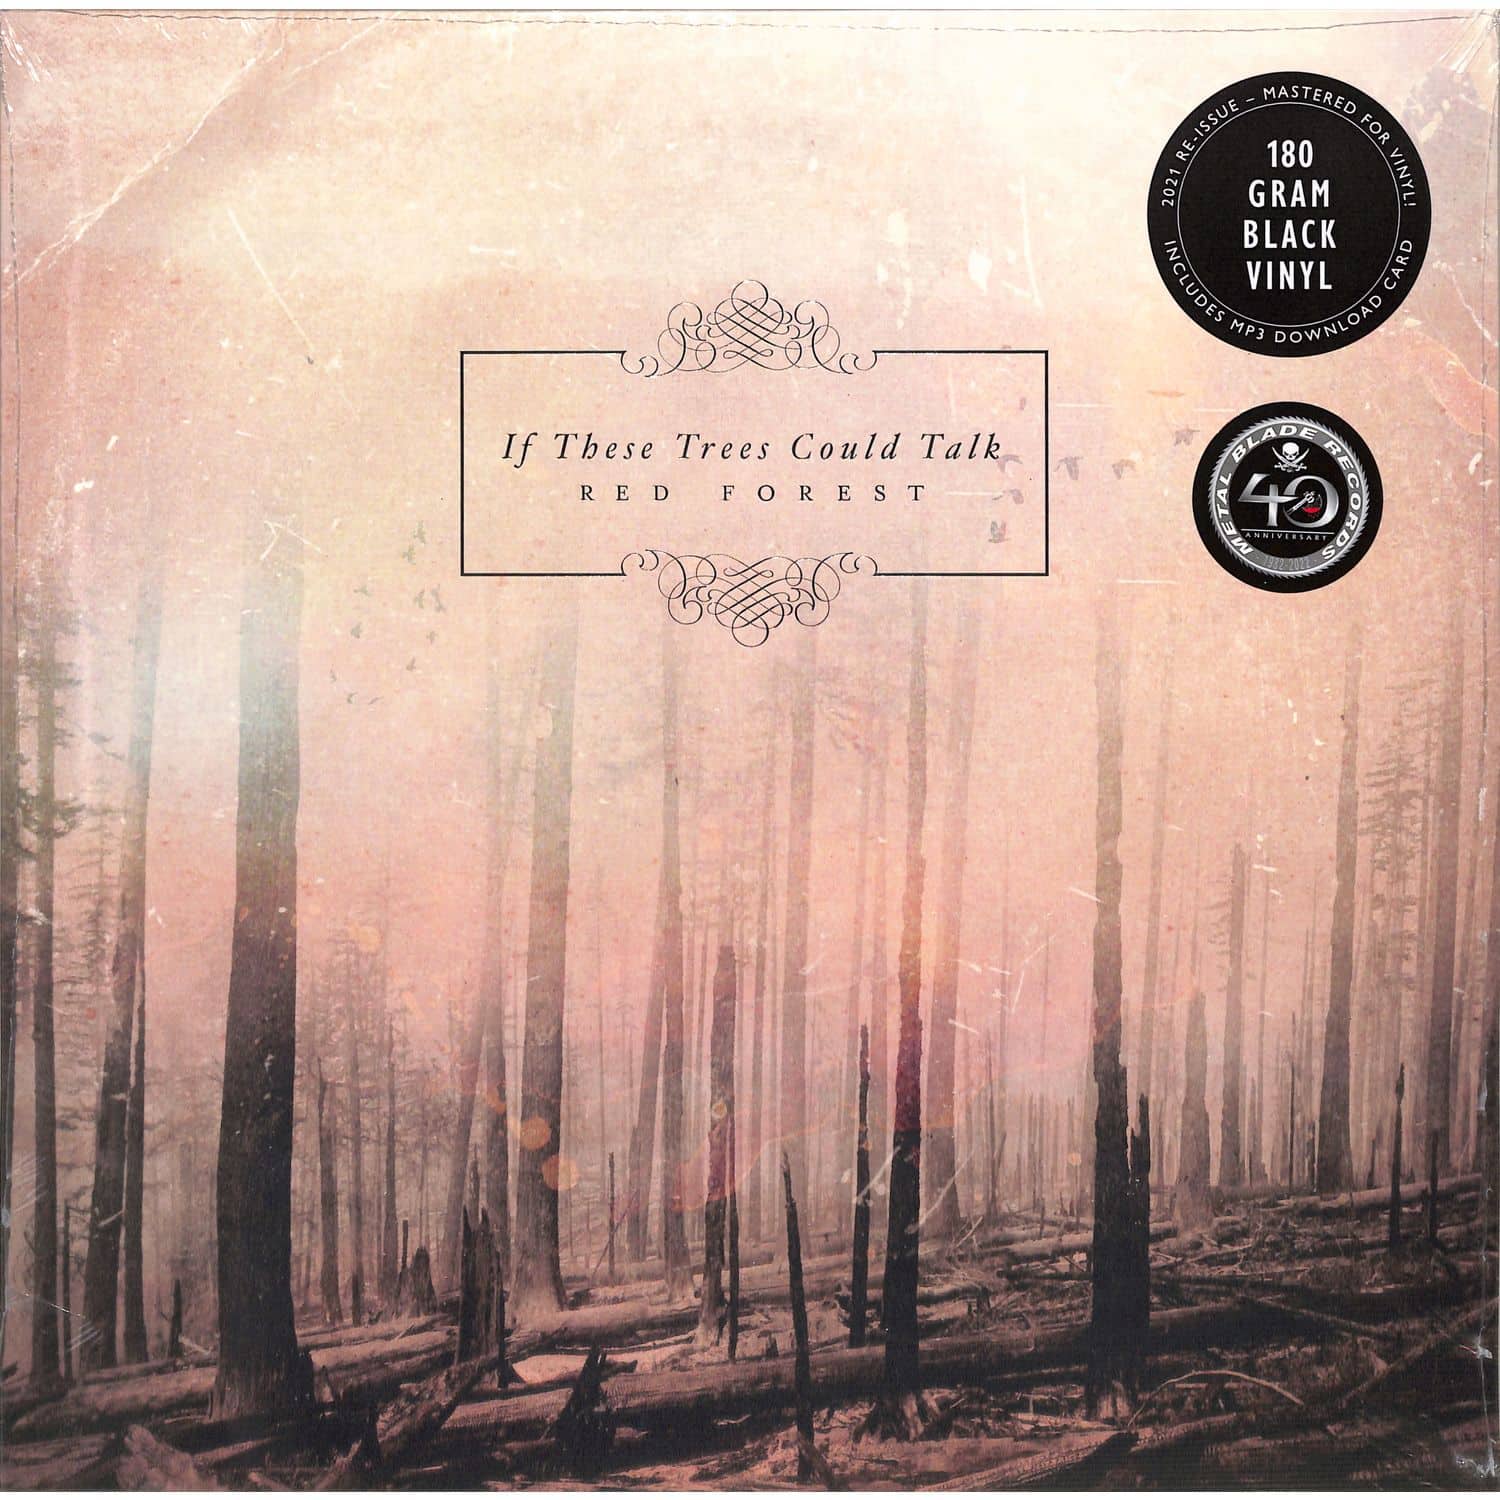 If These Trees Could Talk - RED FOREST 